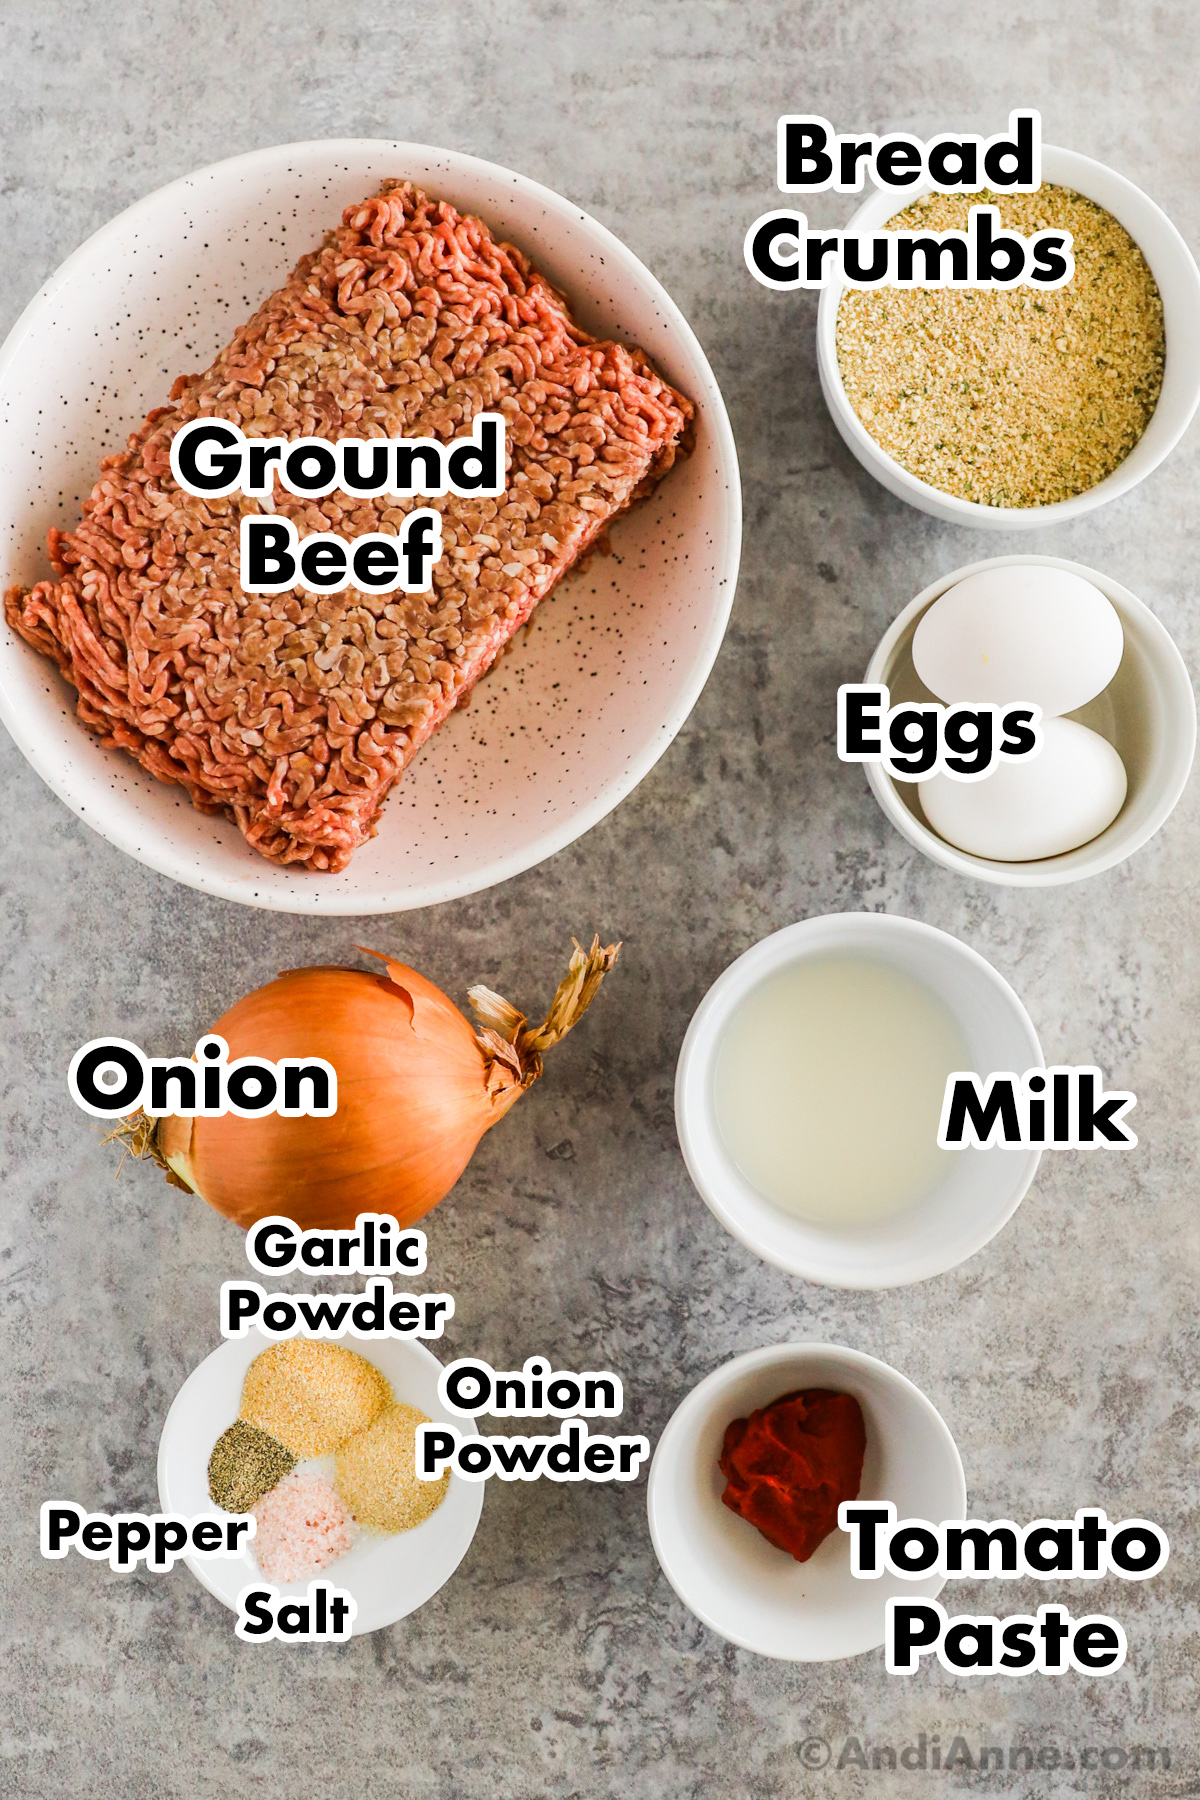 Recipe ingredients including bowl of raw ground beef, bowls of bread crumbs, eggs, milk, spices and tomato paste.